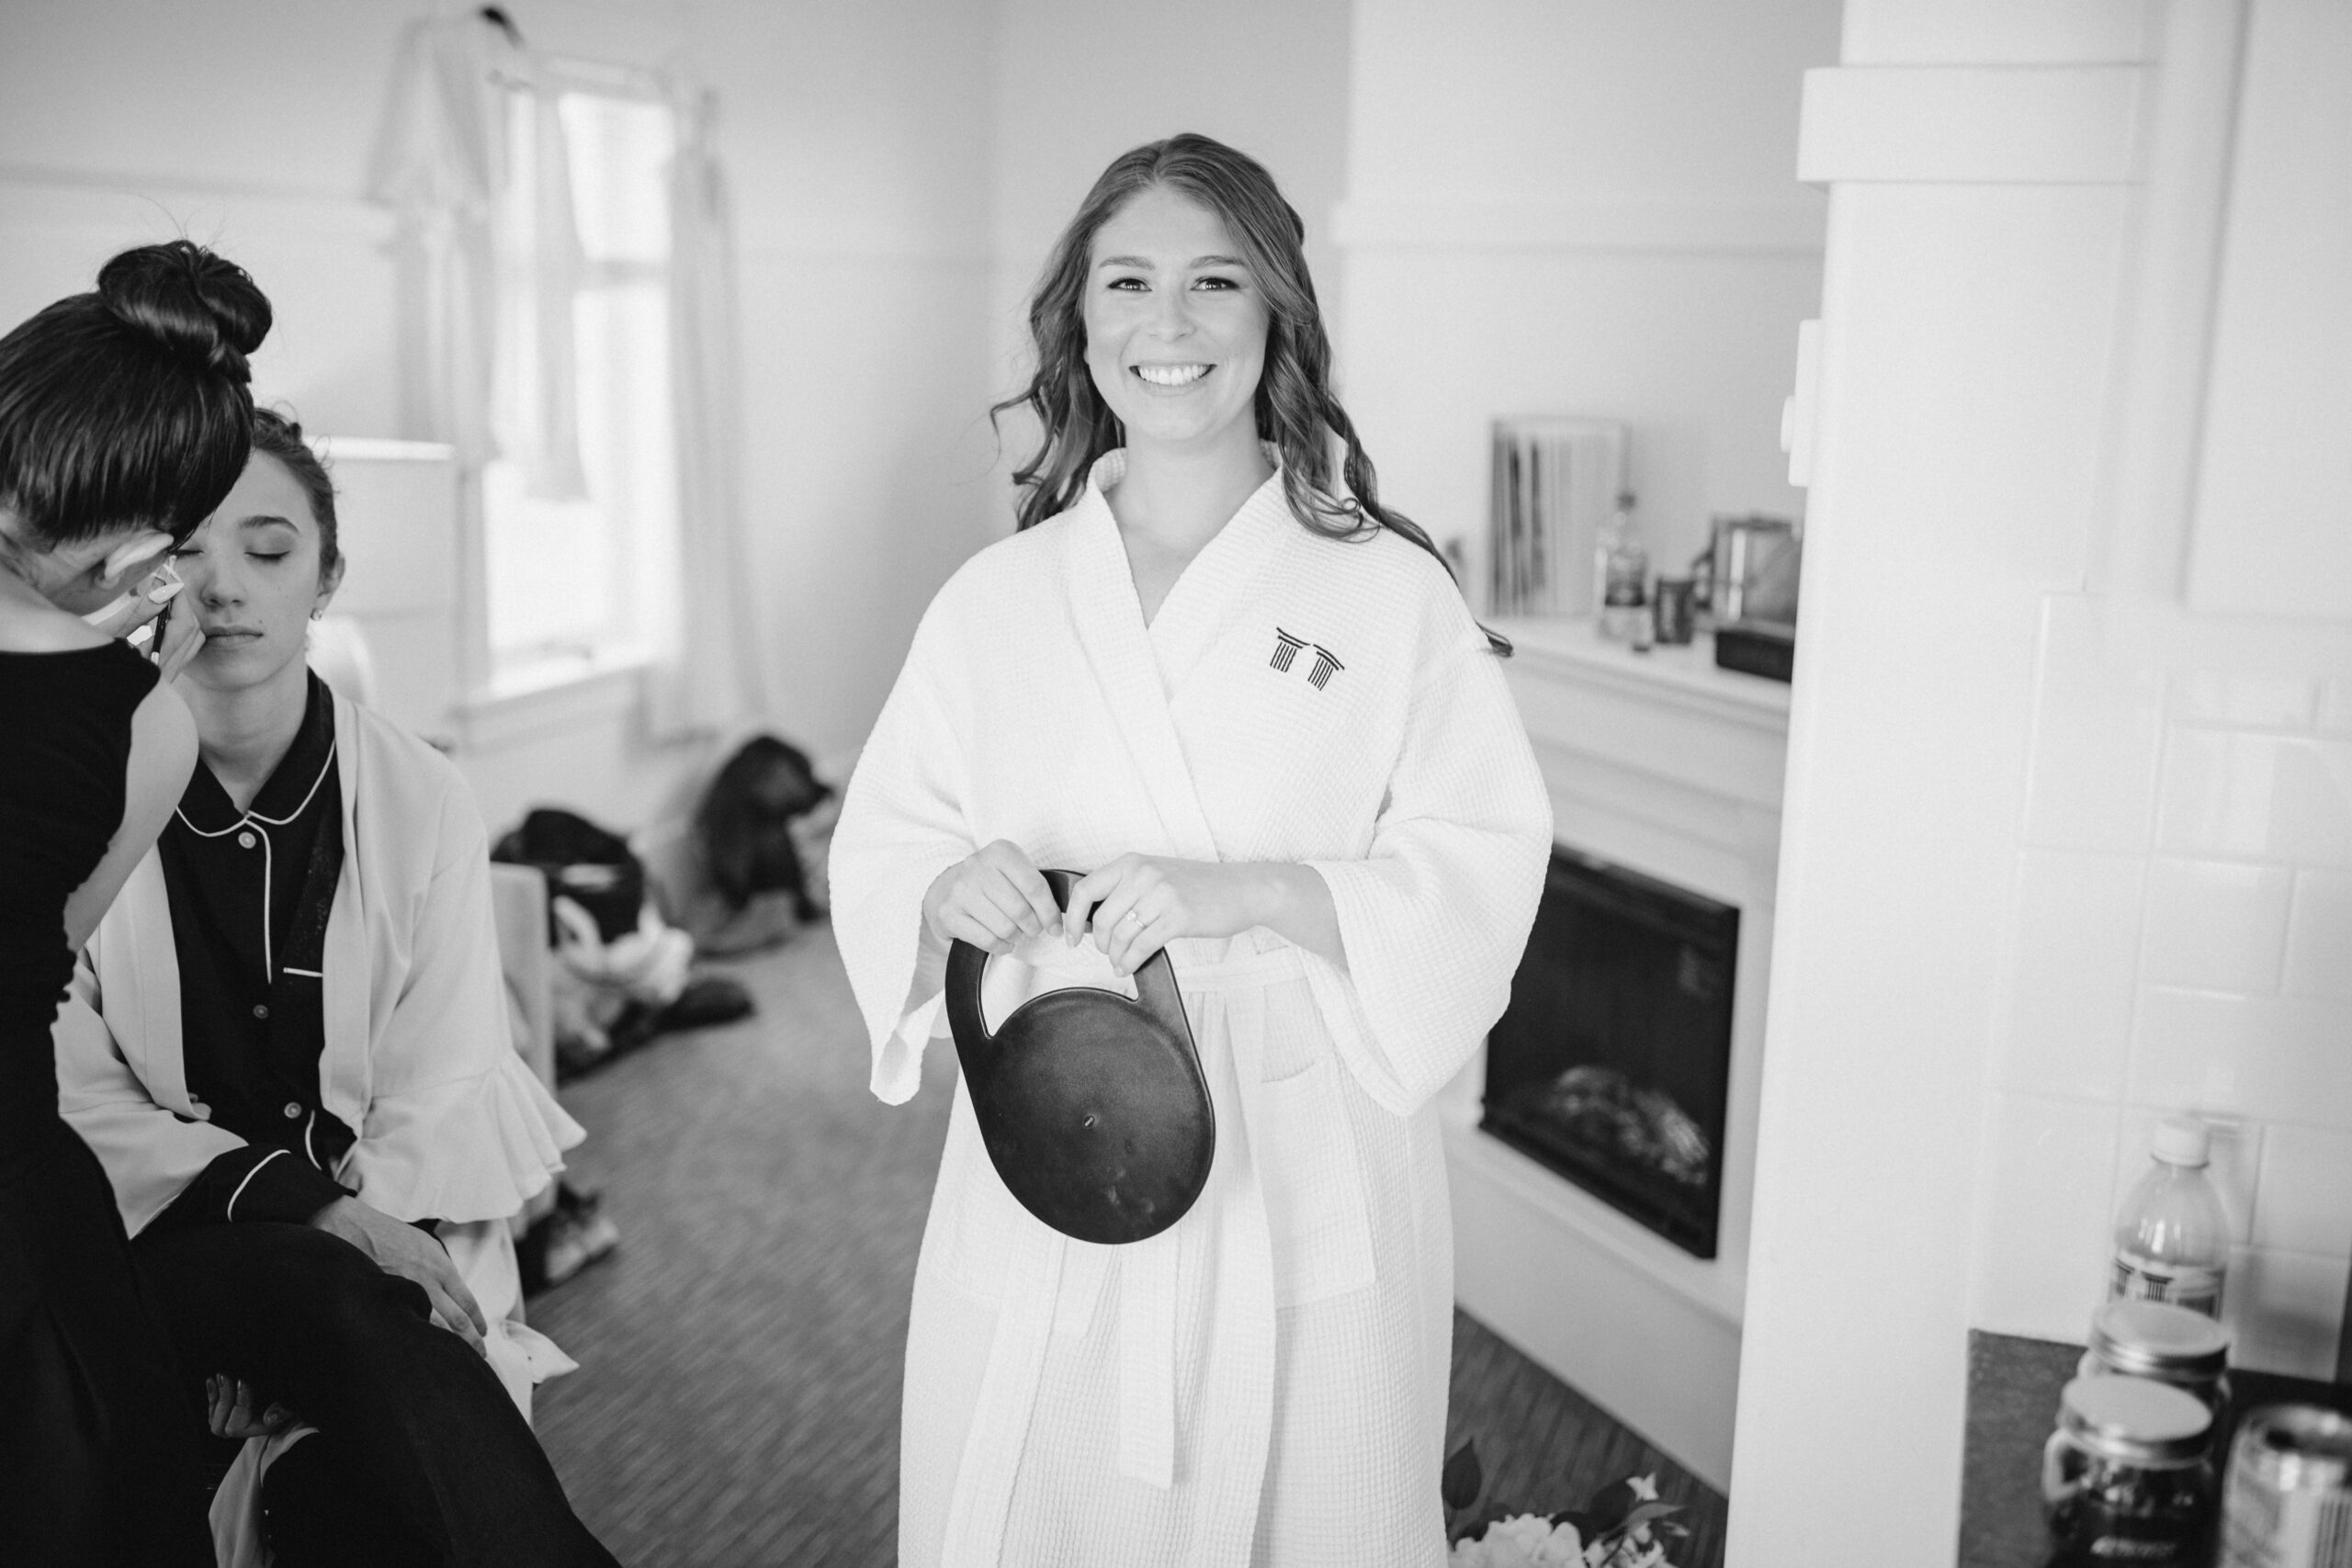 image shows a smiling woman in a robe appearing to get ready for something